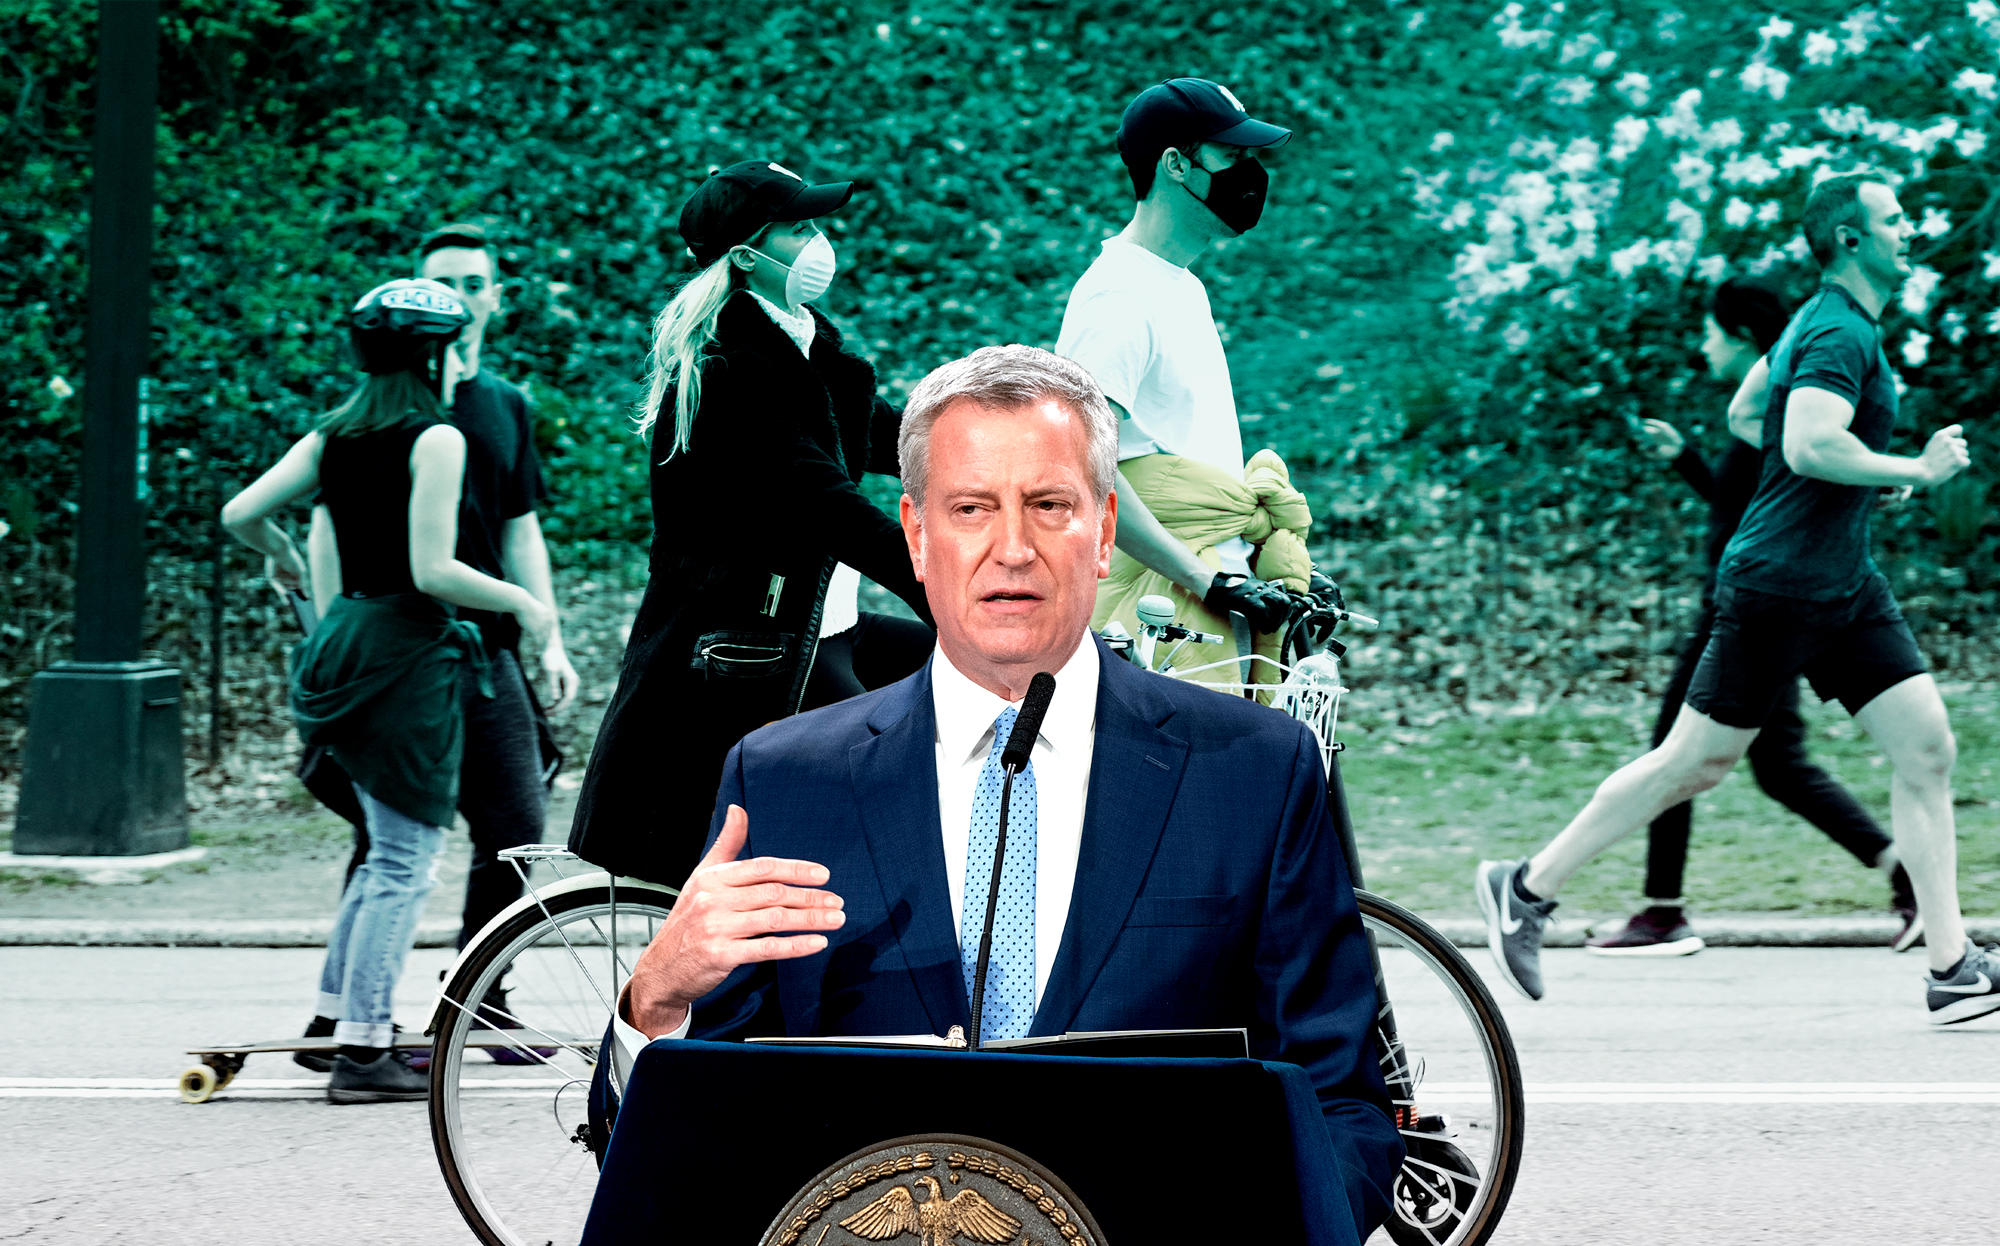 Mayor Bill de Blasio delivered the message this week ahead of a formal plan to combat social gathering in the city. (Credit: Lev Radin/Pacific Press/LightRocket via Getty Images and Cindy Ord/Getty Images)